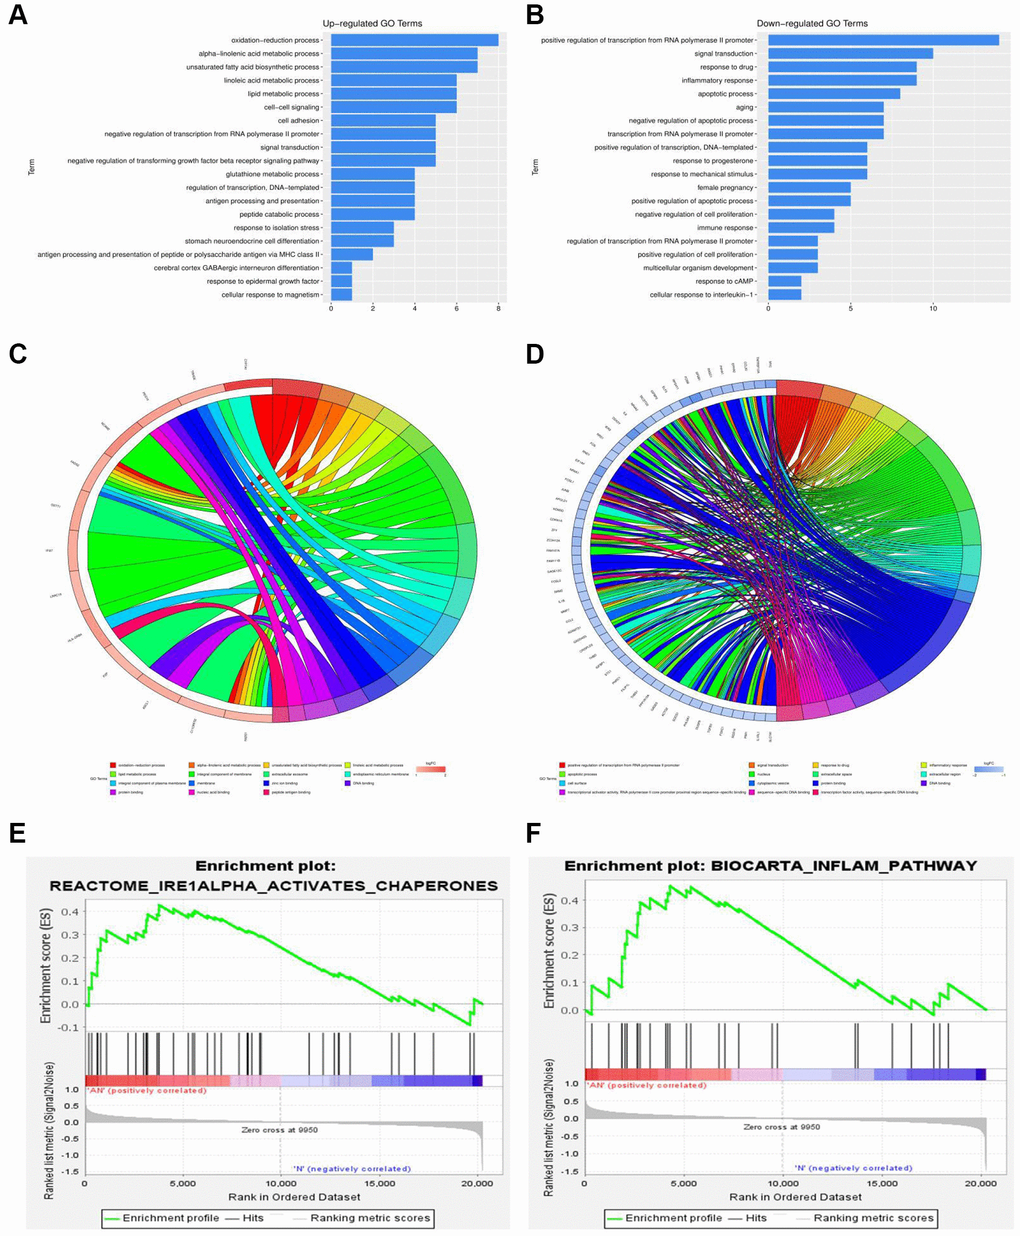 Functional annotation and GSEA analysis of DEGs. (A, B) GO and KEGG enrichment analysis of DEGs associated with NAFLD-related GSE48452. (C, D) GO and KEGG enrichment analysis of DEGs associated with NAFLD-related GSE89632. (E, F) GSEA of DEGs associated with NAFLD-related GSE48452 and GSE89632.